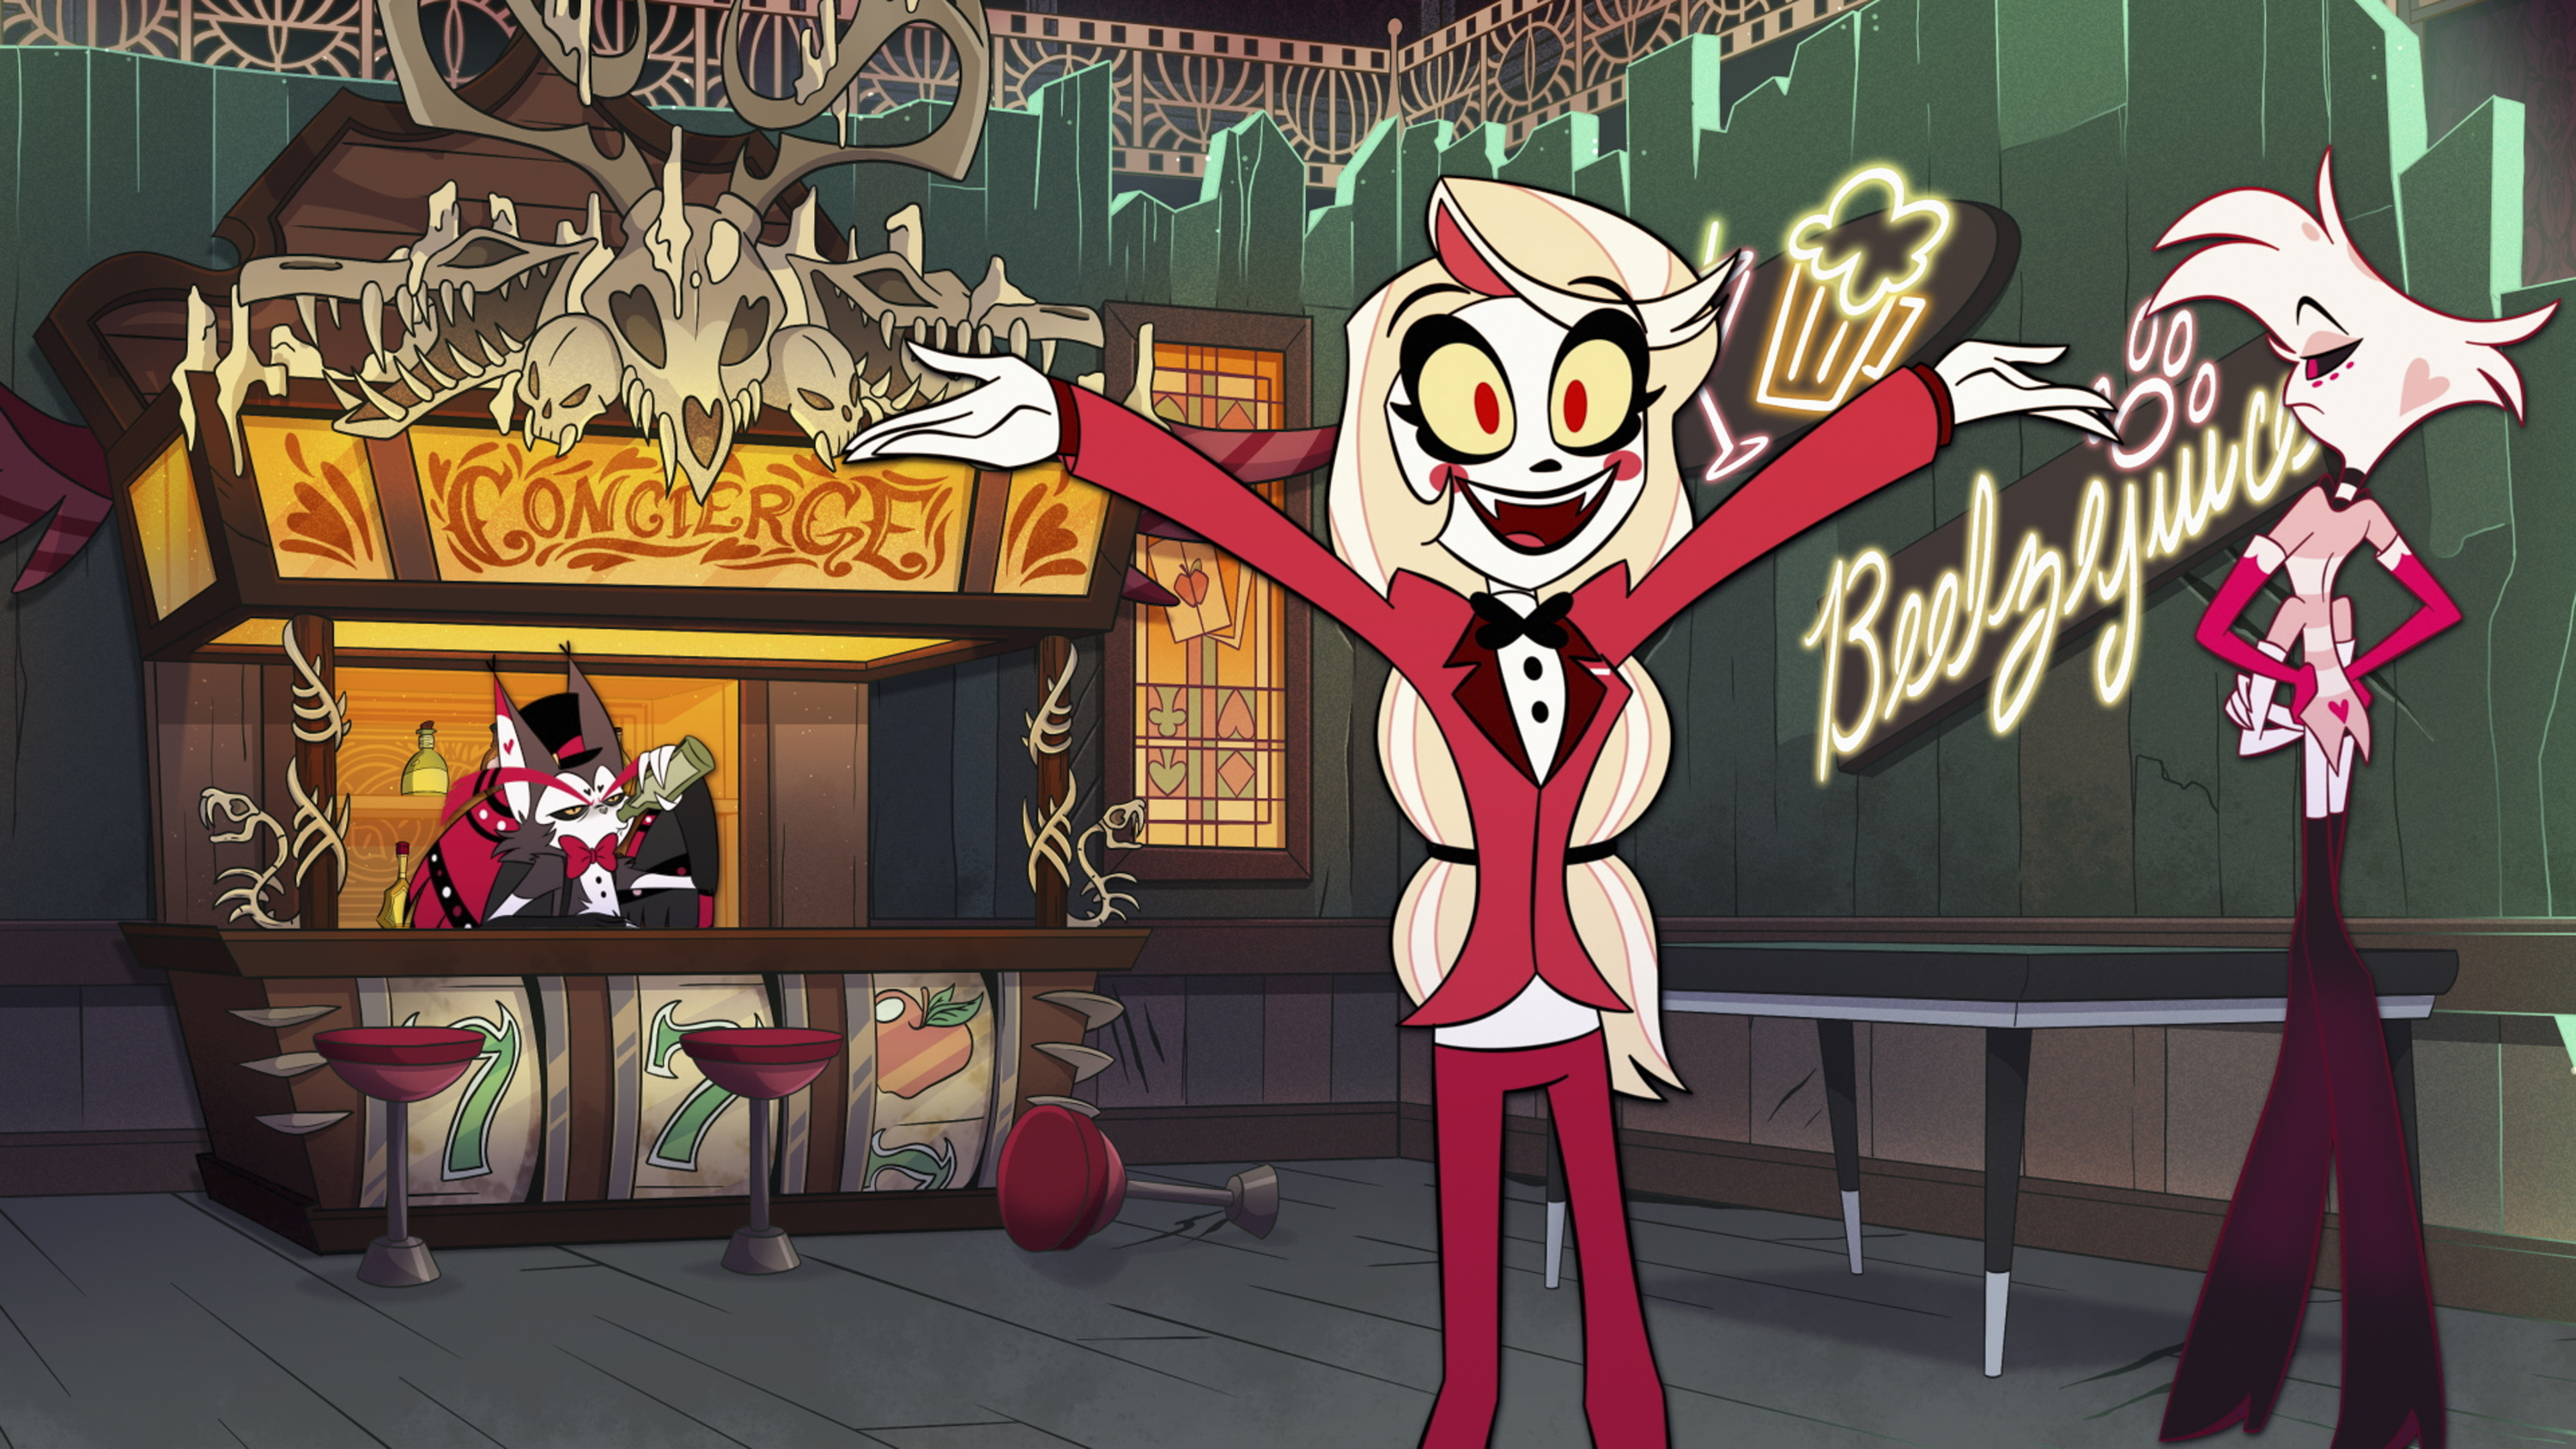 Charlie posing in front of the concierge desk at the Hazbin Hotel